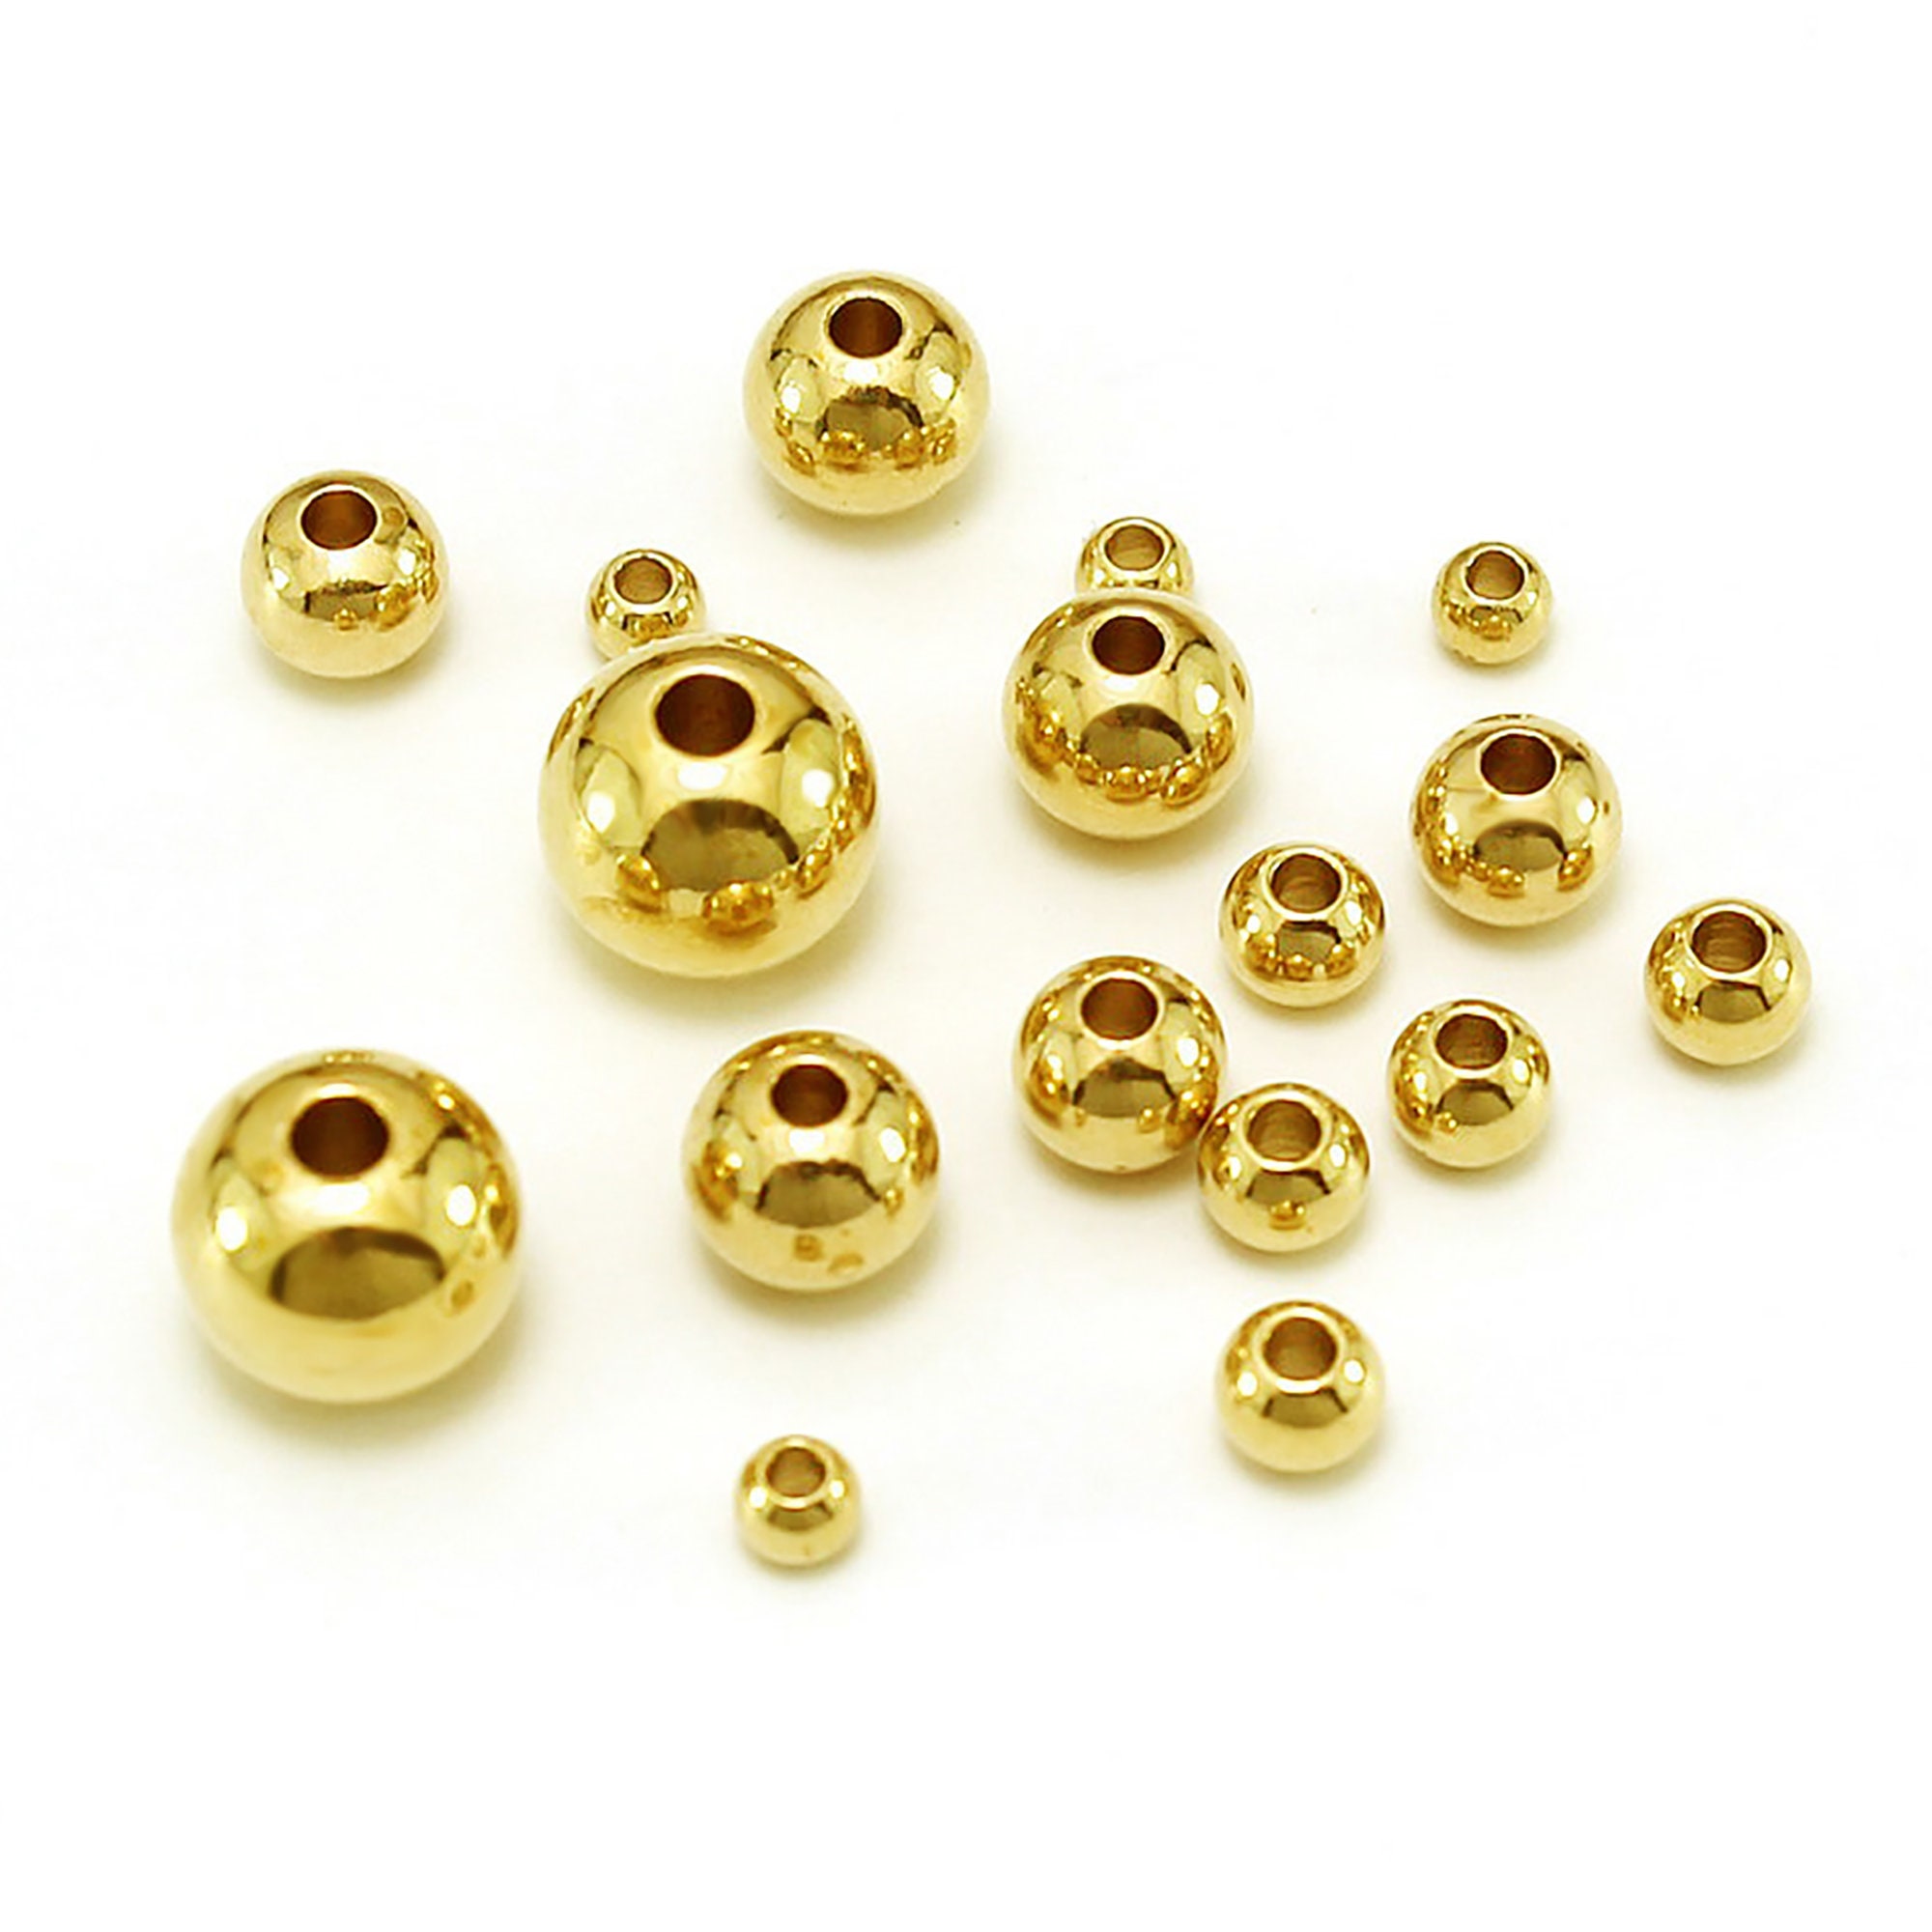  BEADIA 14K Gold Plated Round Spacer Beads 2mm 600pcs for  Jewelry Making Findings Non Tarnish